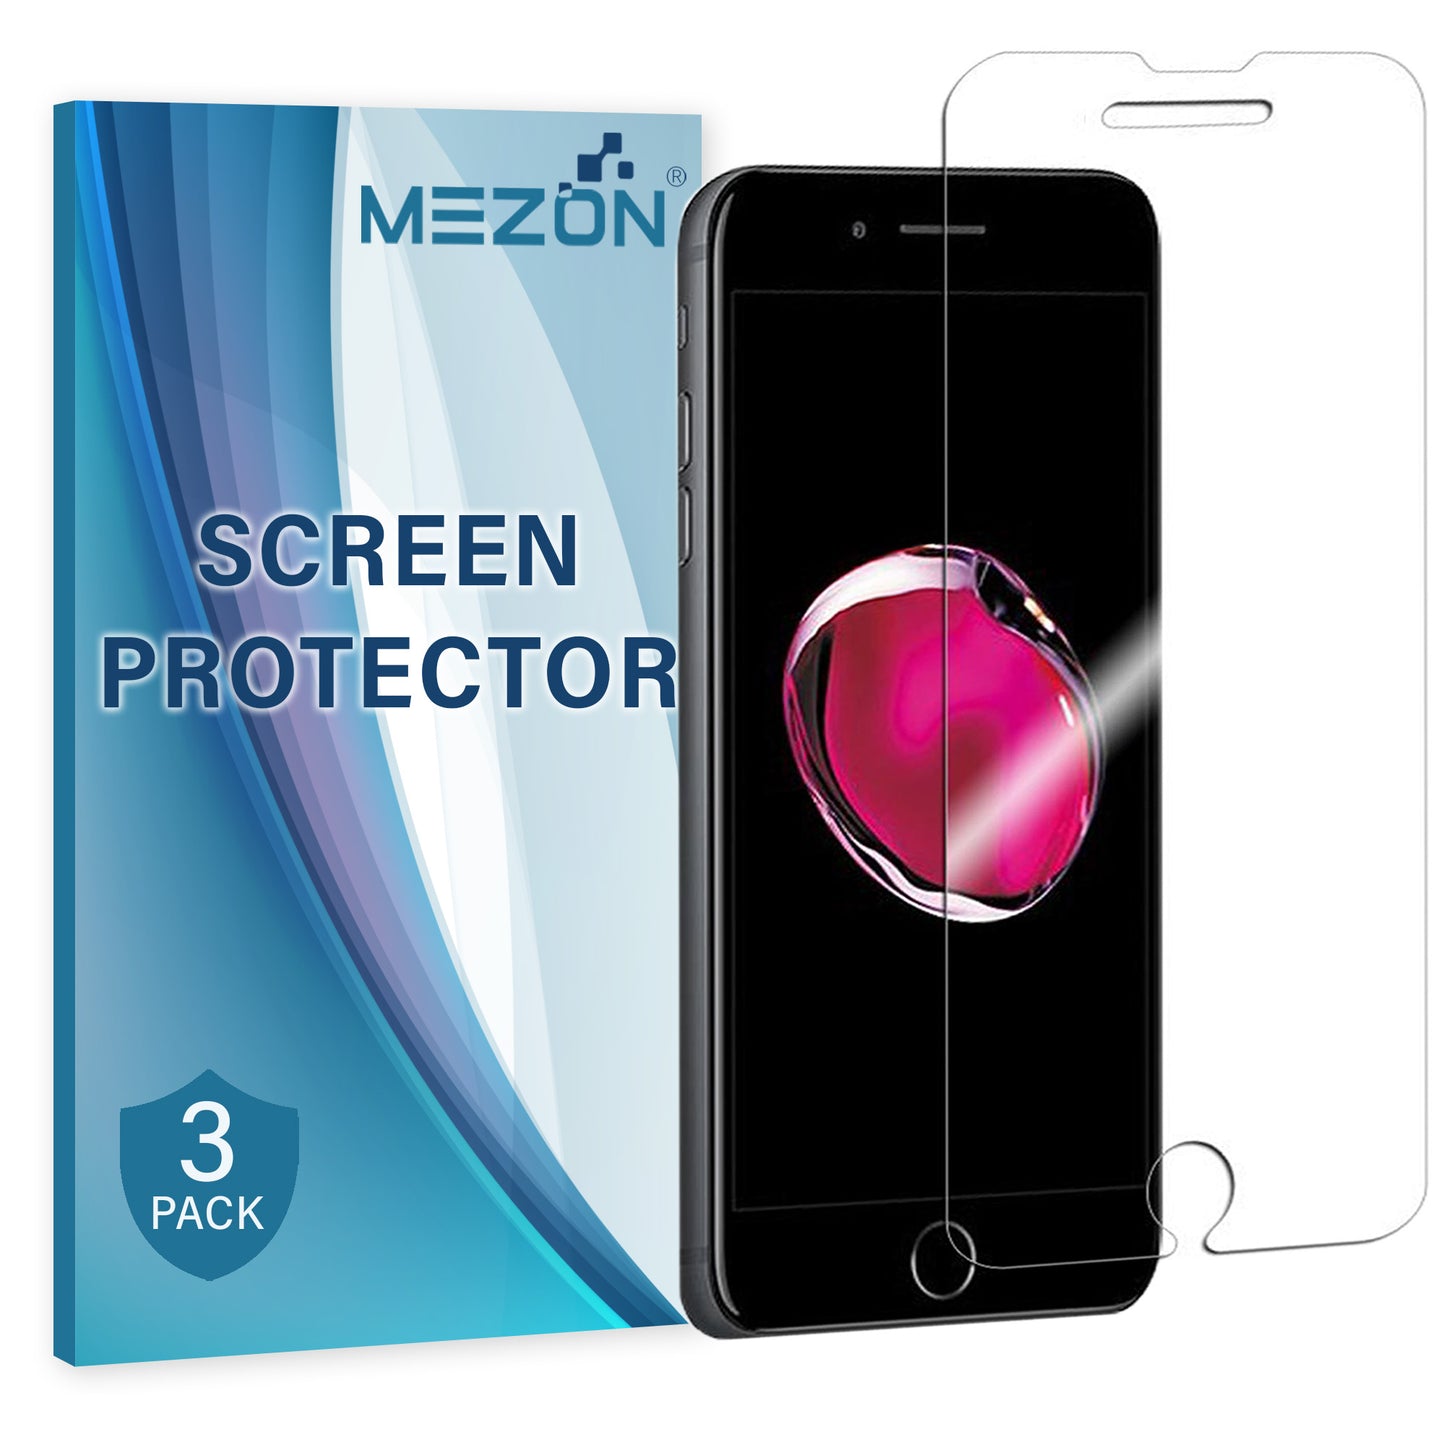 [3 Pack] MEZON Apple iPhone 7 (4.7") Ultra Clear Screen Protector Case Friendly Film (iPhone 7, Clear)